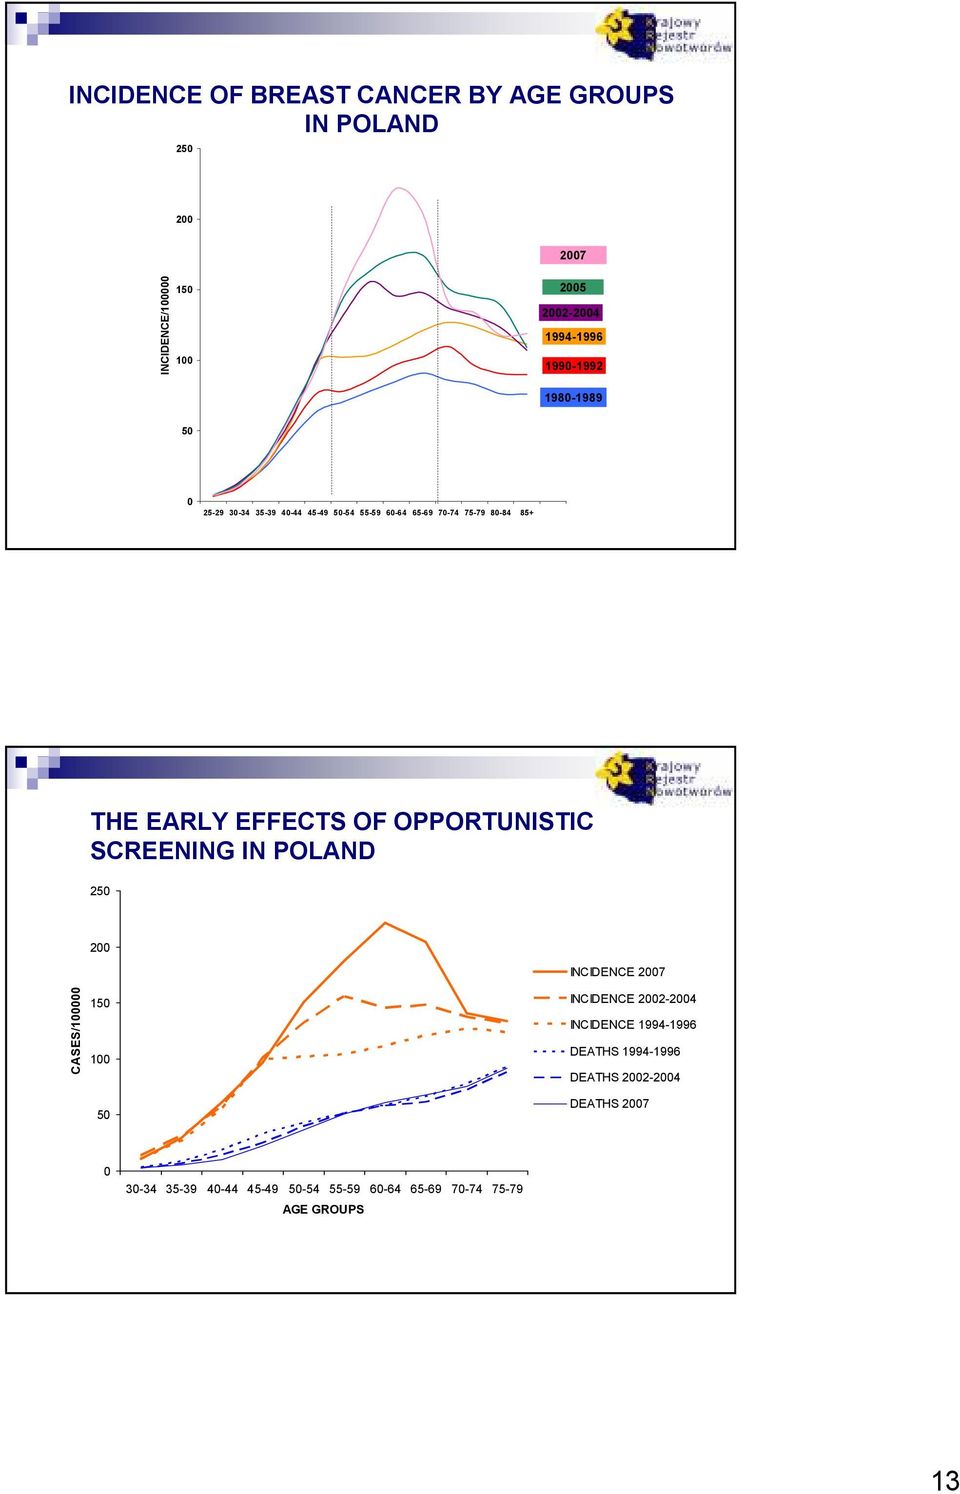 OPPORTUNISTIC SCREENING IN POLAND 2 2 INCIDENCE 27 CASES/1 1 1 INCIDENCE 22-24 INCIDENCE